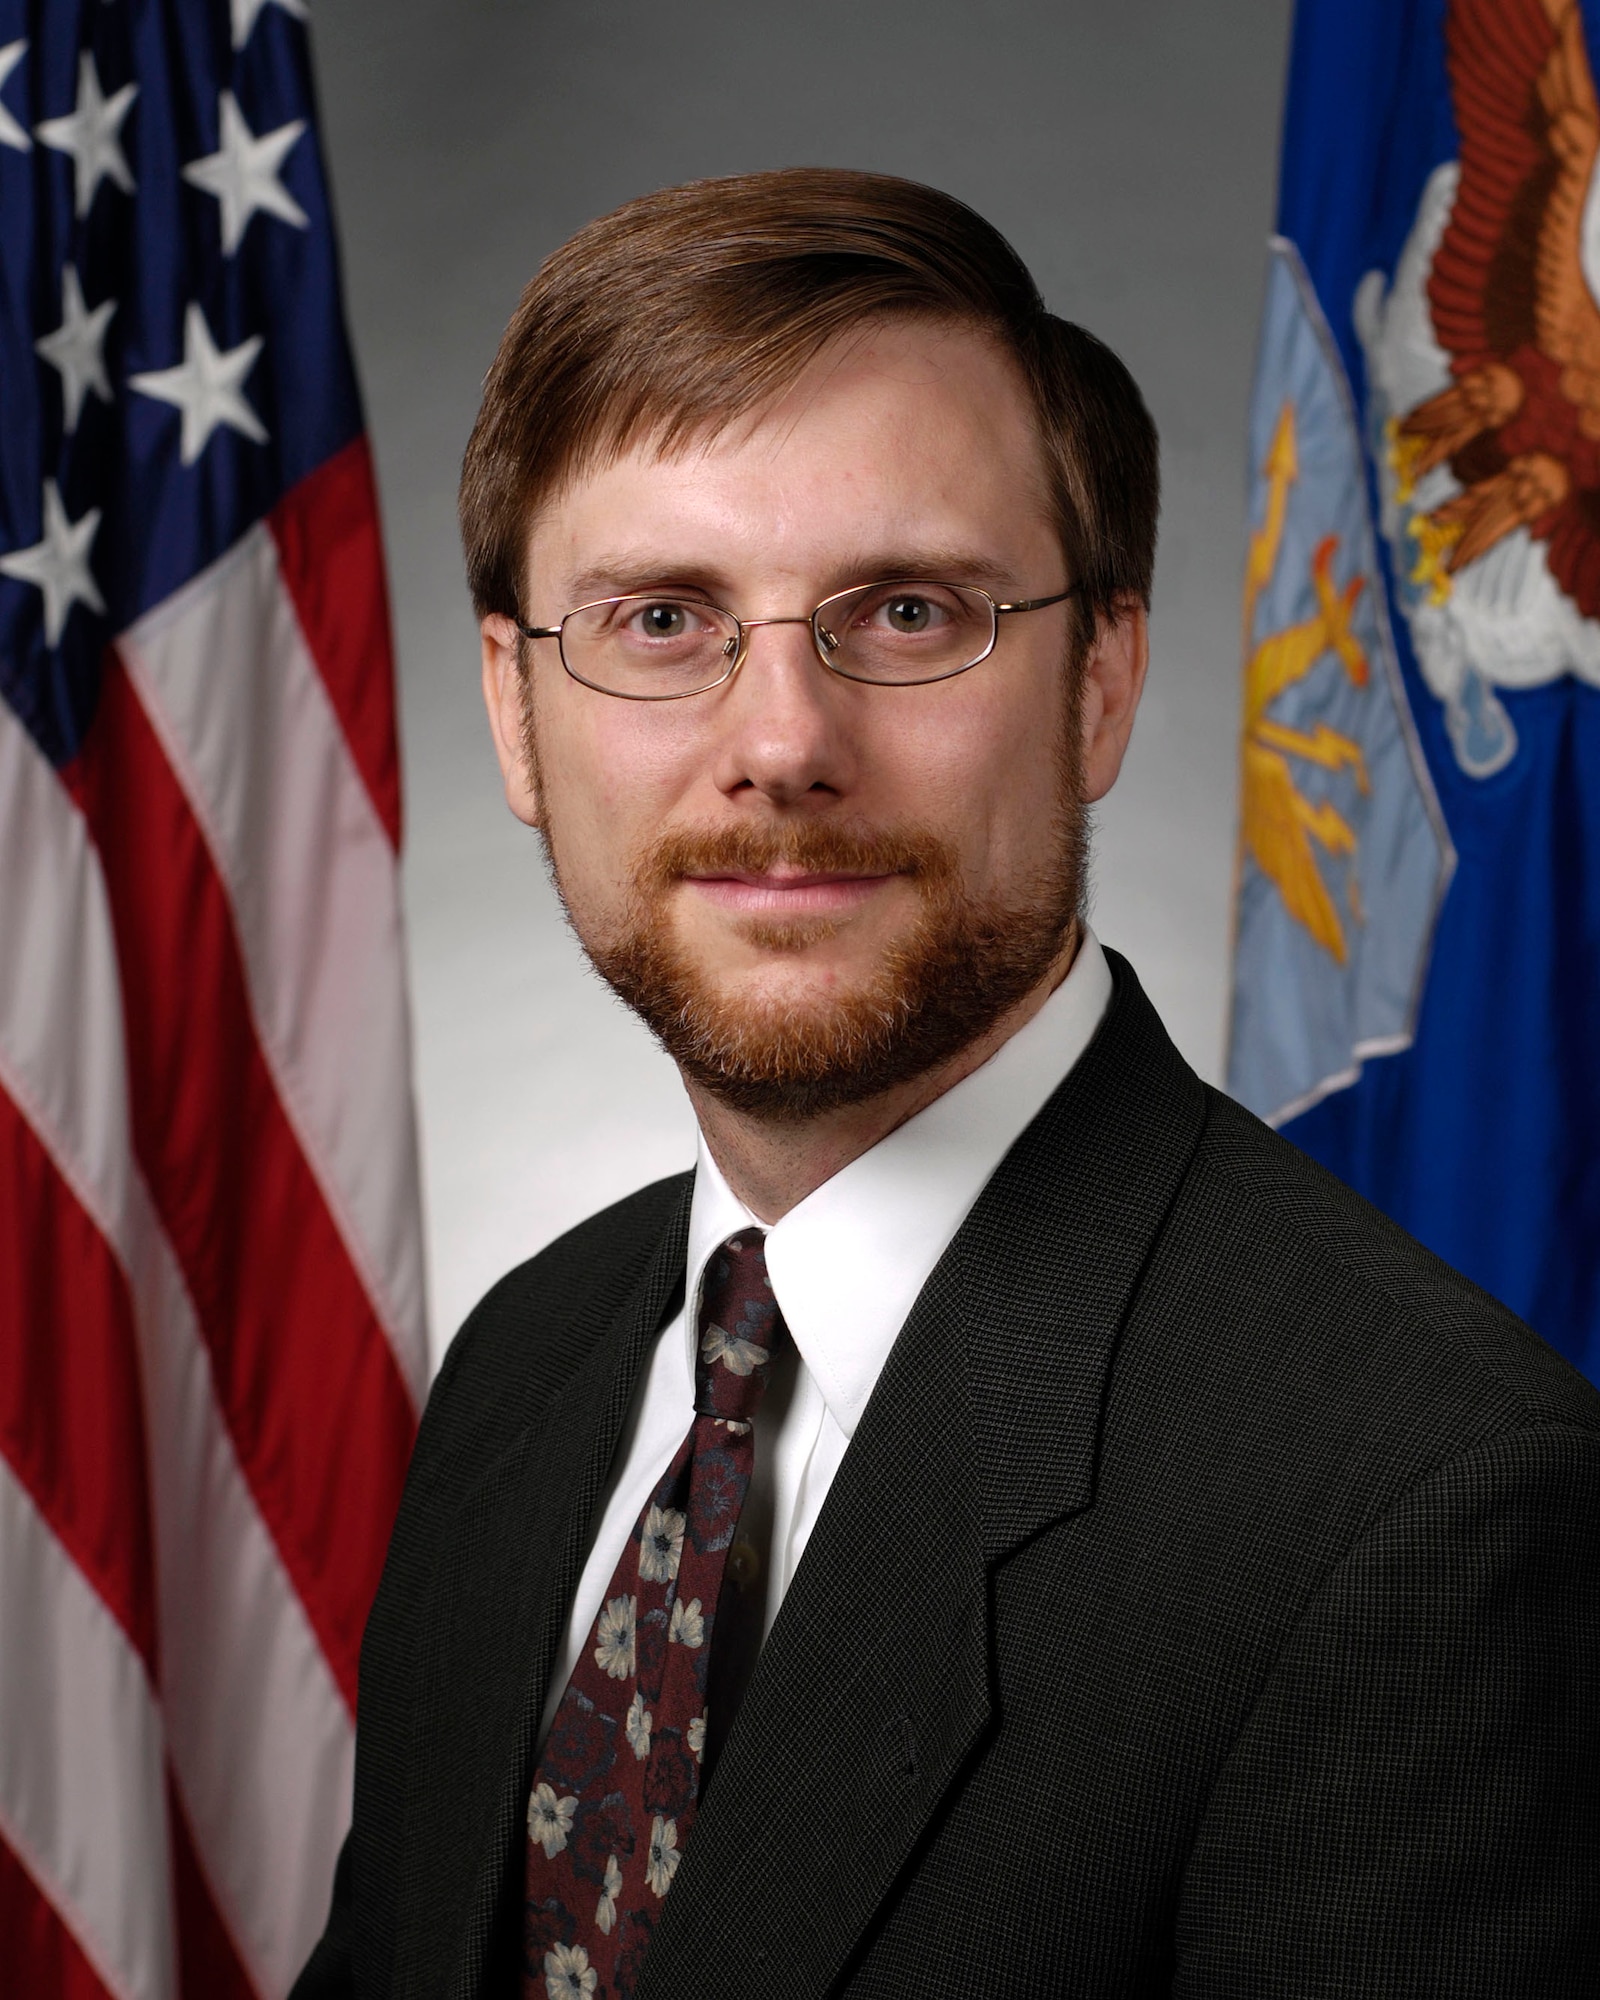 President Barack Obama has appointed Dr. Jamie Morin as the Acting Under Secretary of the Air Force. He has served as the Assistant Secretary of the Air Force for financial management and comptroller.